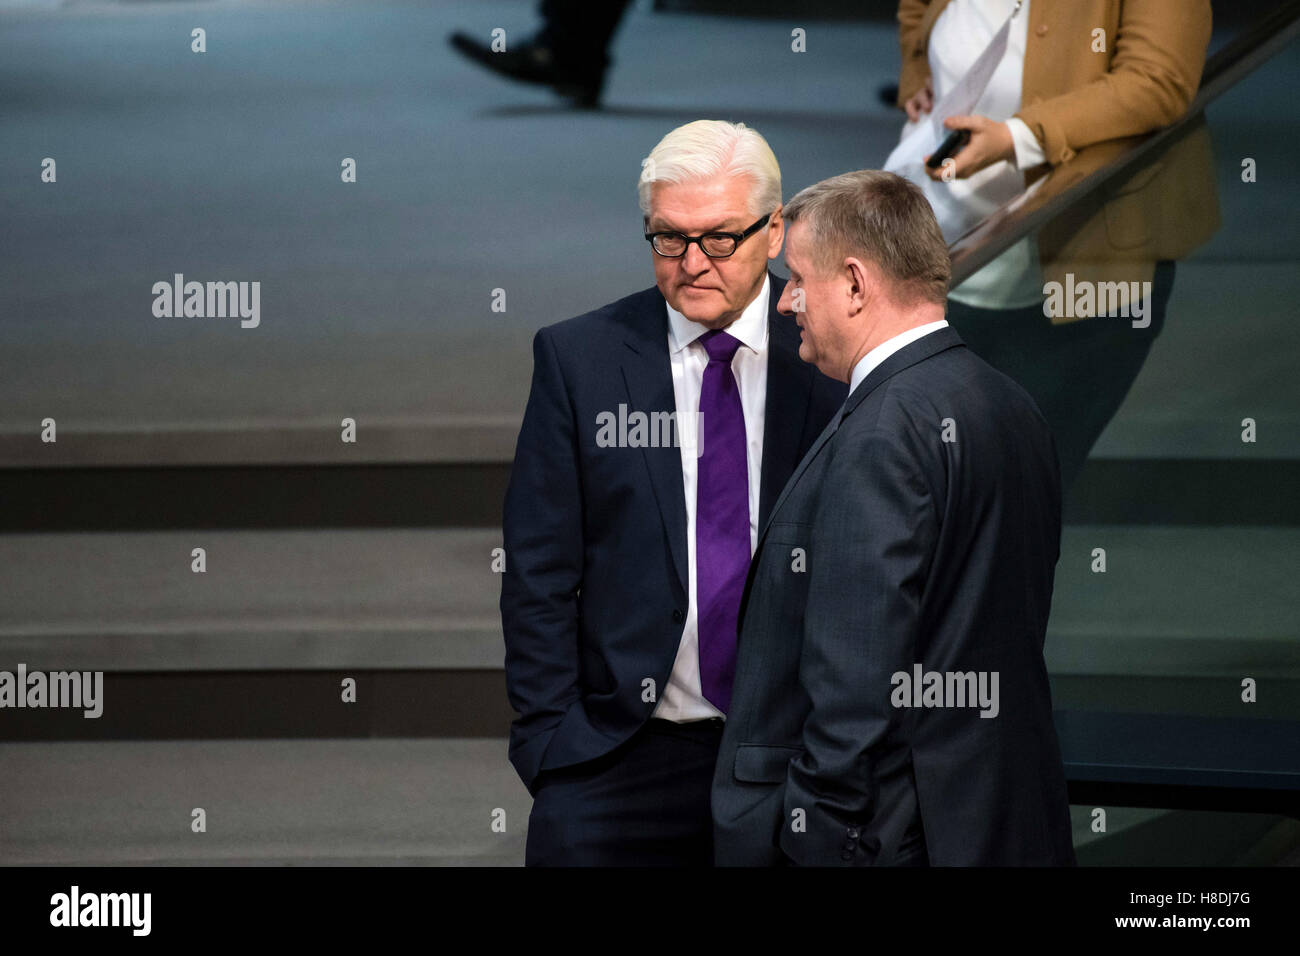 Berlin, Germany. 11th Nov, 2016. Minister of the Exterior Frank-Walter Steinmeier (SPD, l) and Minister of Health Hermann Groehe (CDU) chatting in the plenary hall of the German Bundestag (federal parliament) in Berlin, Germany, 11 November 2016. PHOTO: GREGOR FISCHER/dpa/Alamy Live News Stock Photo